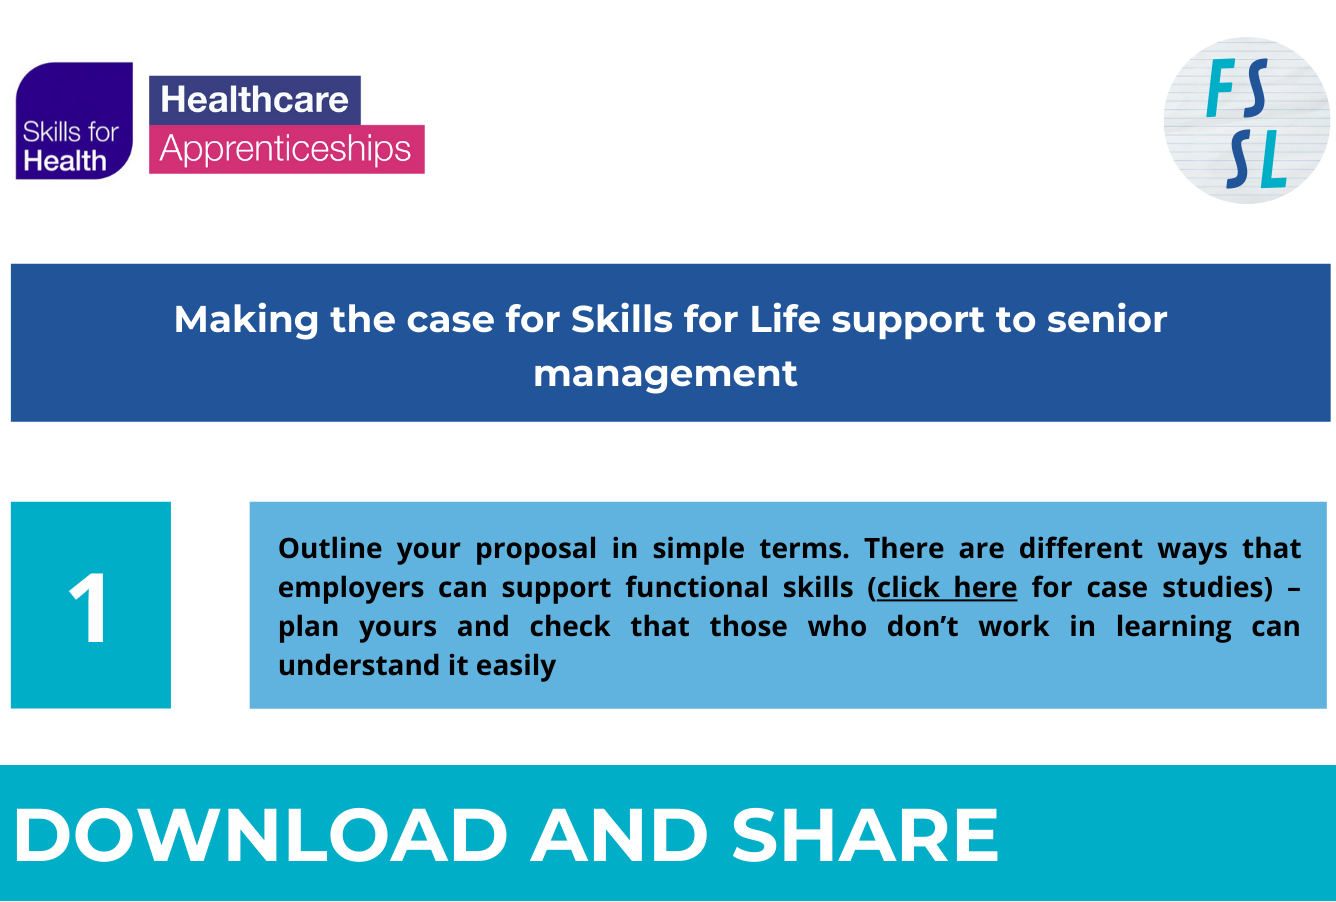 Making the case for Skills for Life support to senior management. 
(1)	Outline your proposal in simple terms. There are different ways that employers can support functional skills (case studies: https://haso.skillsforhealth.org.uk/case-studies-3/) plan yours and check that those who don’t work in learning can understand it easily.
(2)	Cost it up – Demonstrate why you think remedial work for functional skills is a key pillar of workforce planning and will deliver sustainable, long-term solutions. This may involve working with colleagues from other departments, which may in turn have positive effects by creating a supportive network of allies.
(3)	Read how other employers have done in the case studies section and join the Talent for Care Skills for Life network by emailing talentforcare@hee.nhs.uk for support and ideas from colleagues across the country.
(4)	Read the recent research and pick out key elements to support your case.
(5)	Research the backgrounds of your senior management team e.g. on LinkedIn. By finding out more about them, you may find a way to strike common ground.
(6)	Continue if you get knocked back. You may not win the argument on your first attempt, but don’t give up. Senior management may need time to absorb your ideas and proposals. Many employers who have had success with this agenda won it over a long period rather than overnight.